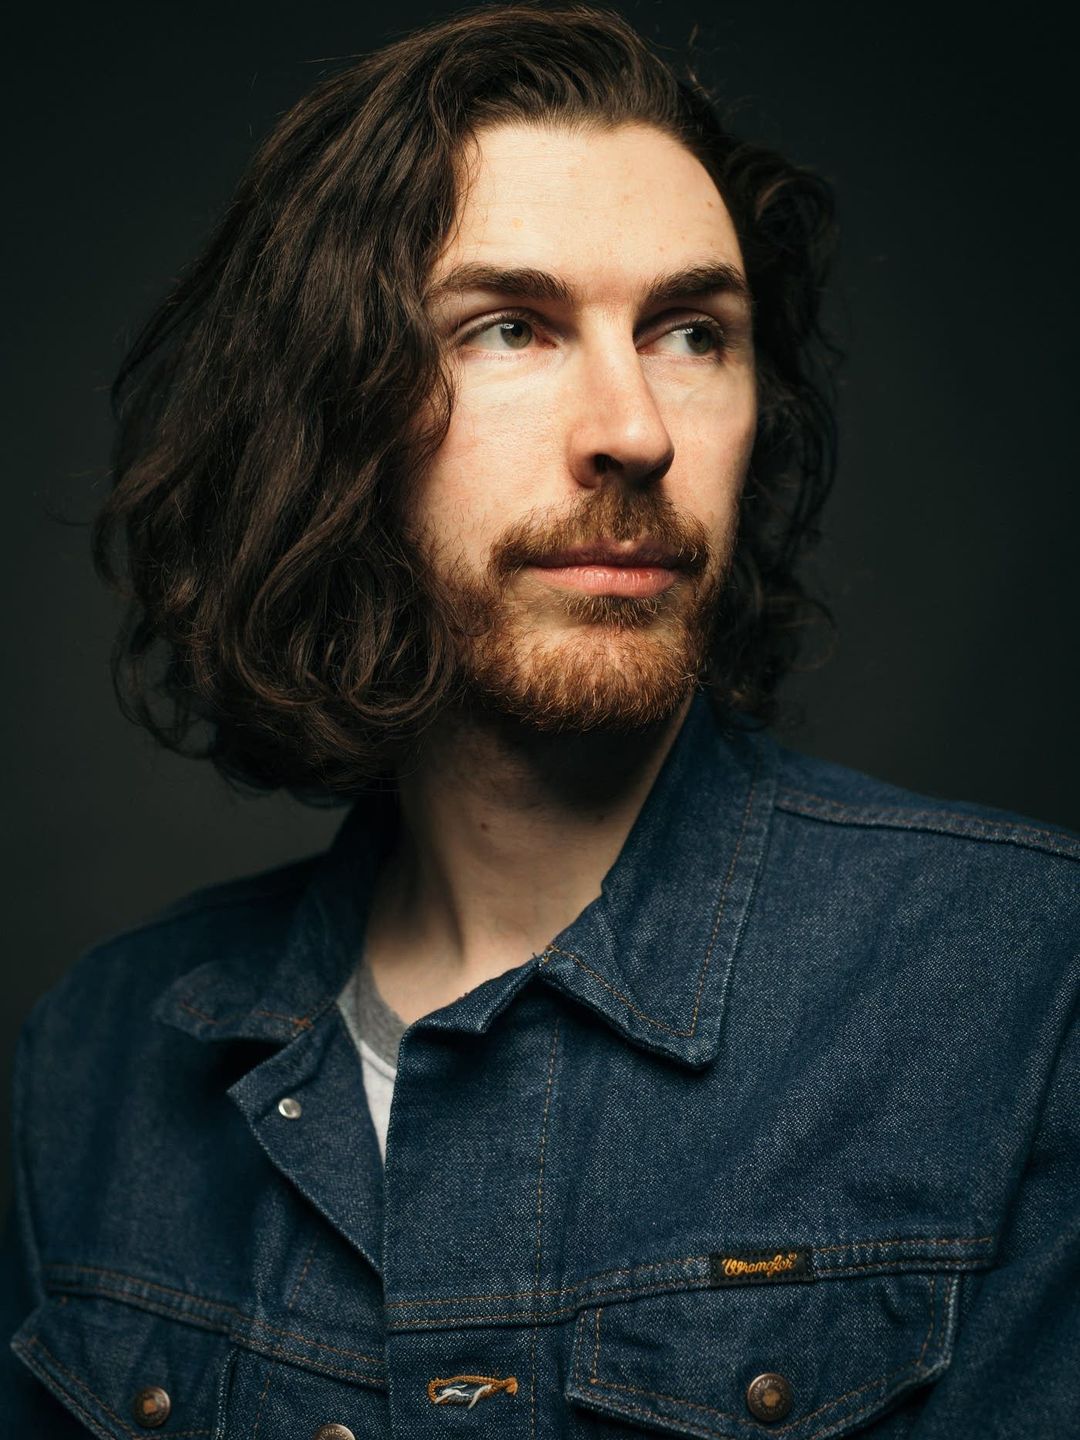 Hozier who is his father